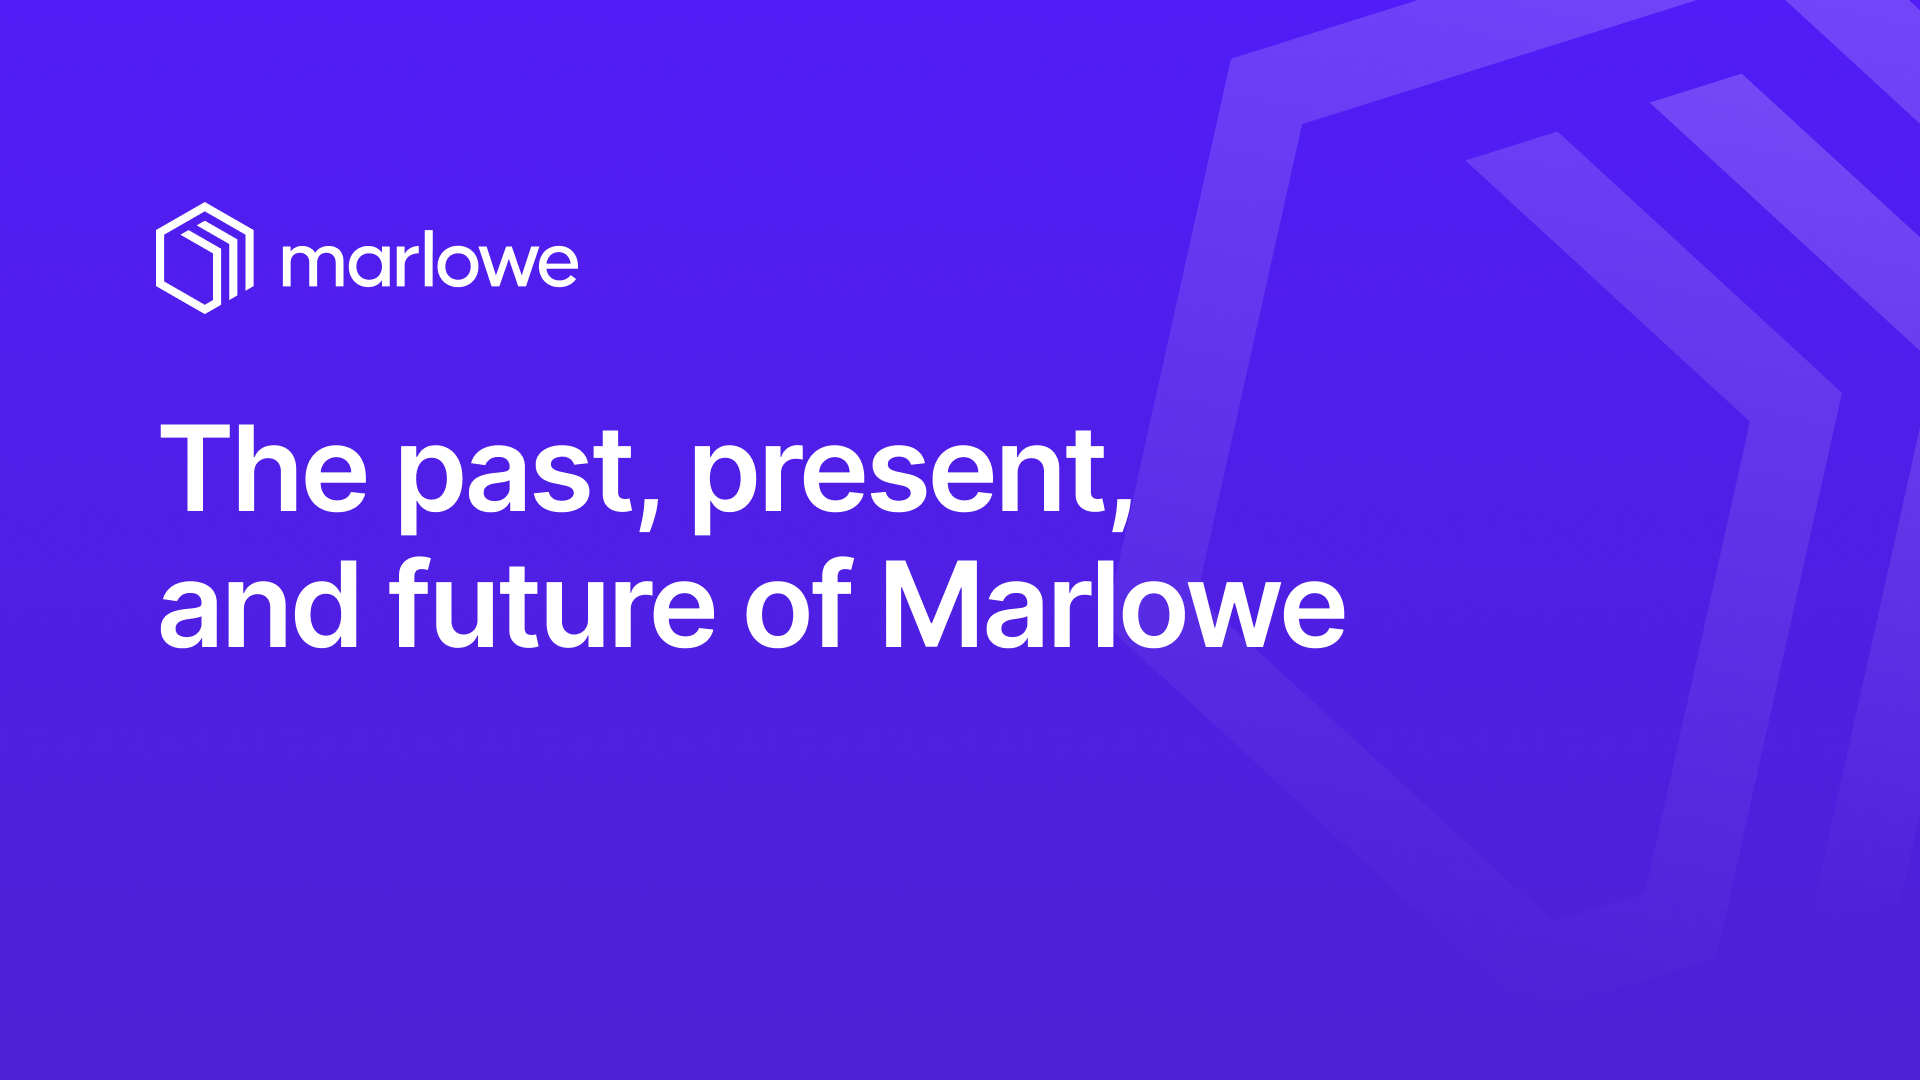 The past, present, and future of Marlowe: a journey of innovation and community empowerment